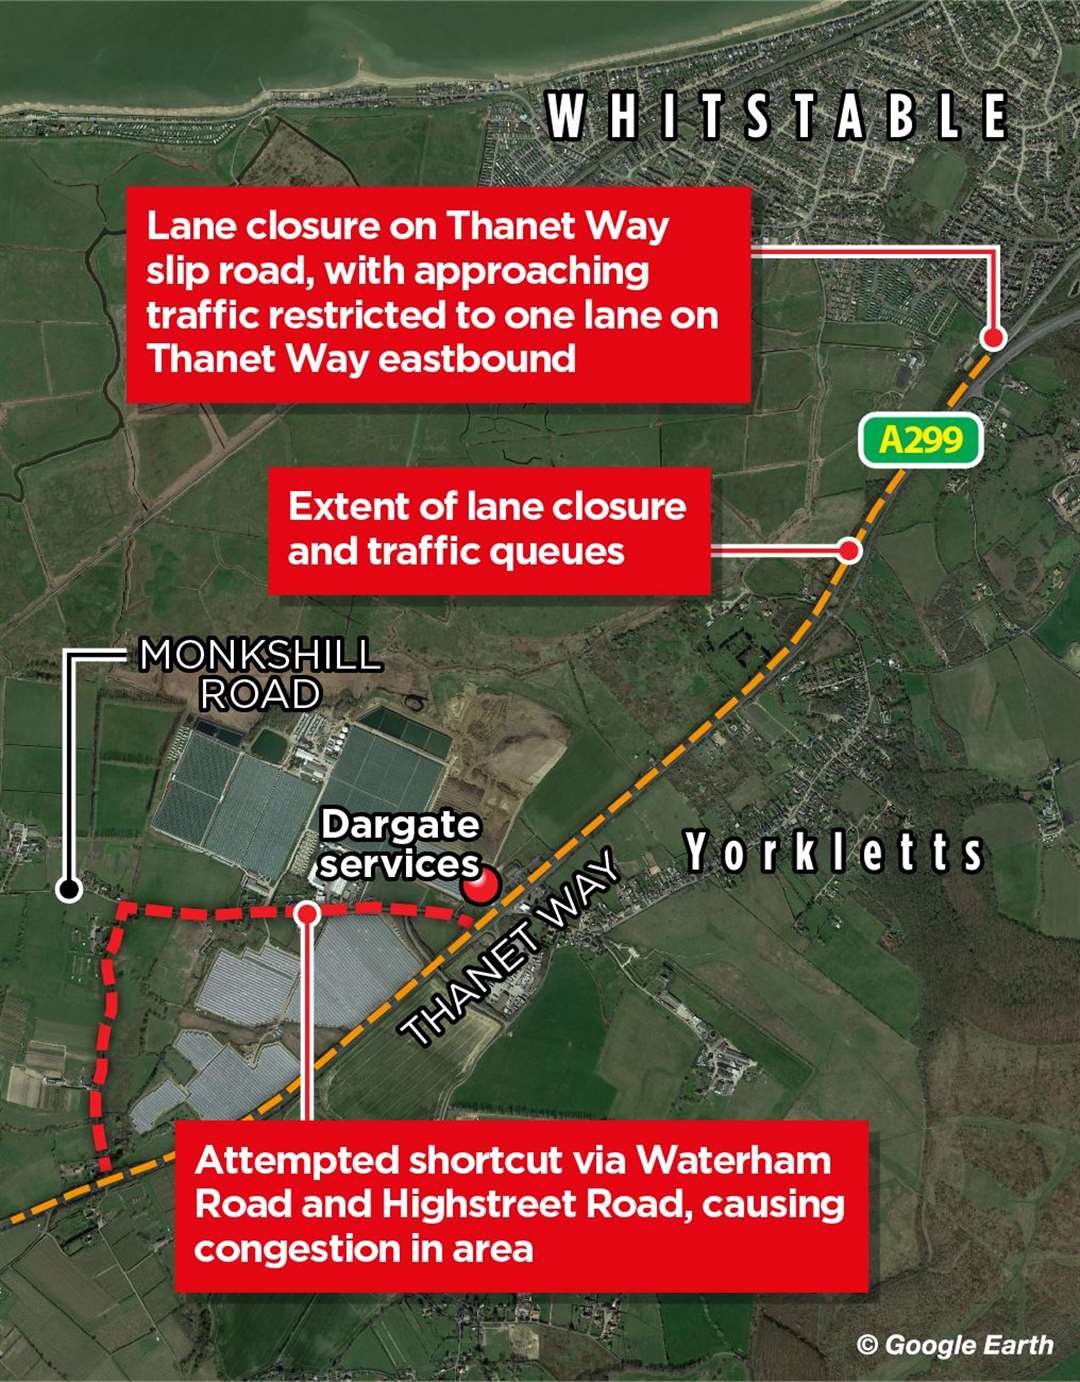 Drivers attempting to take a shortcut off the Thanet Way at Waterham Road are causing delays... while the lane closure on the dual carriageway will remain throughout the week